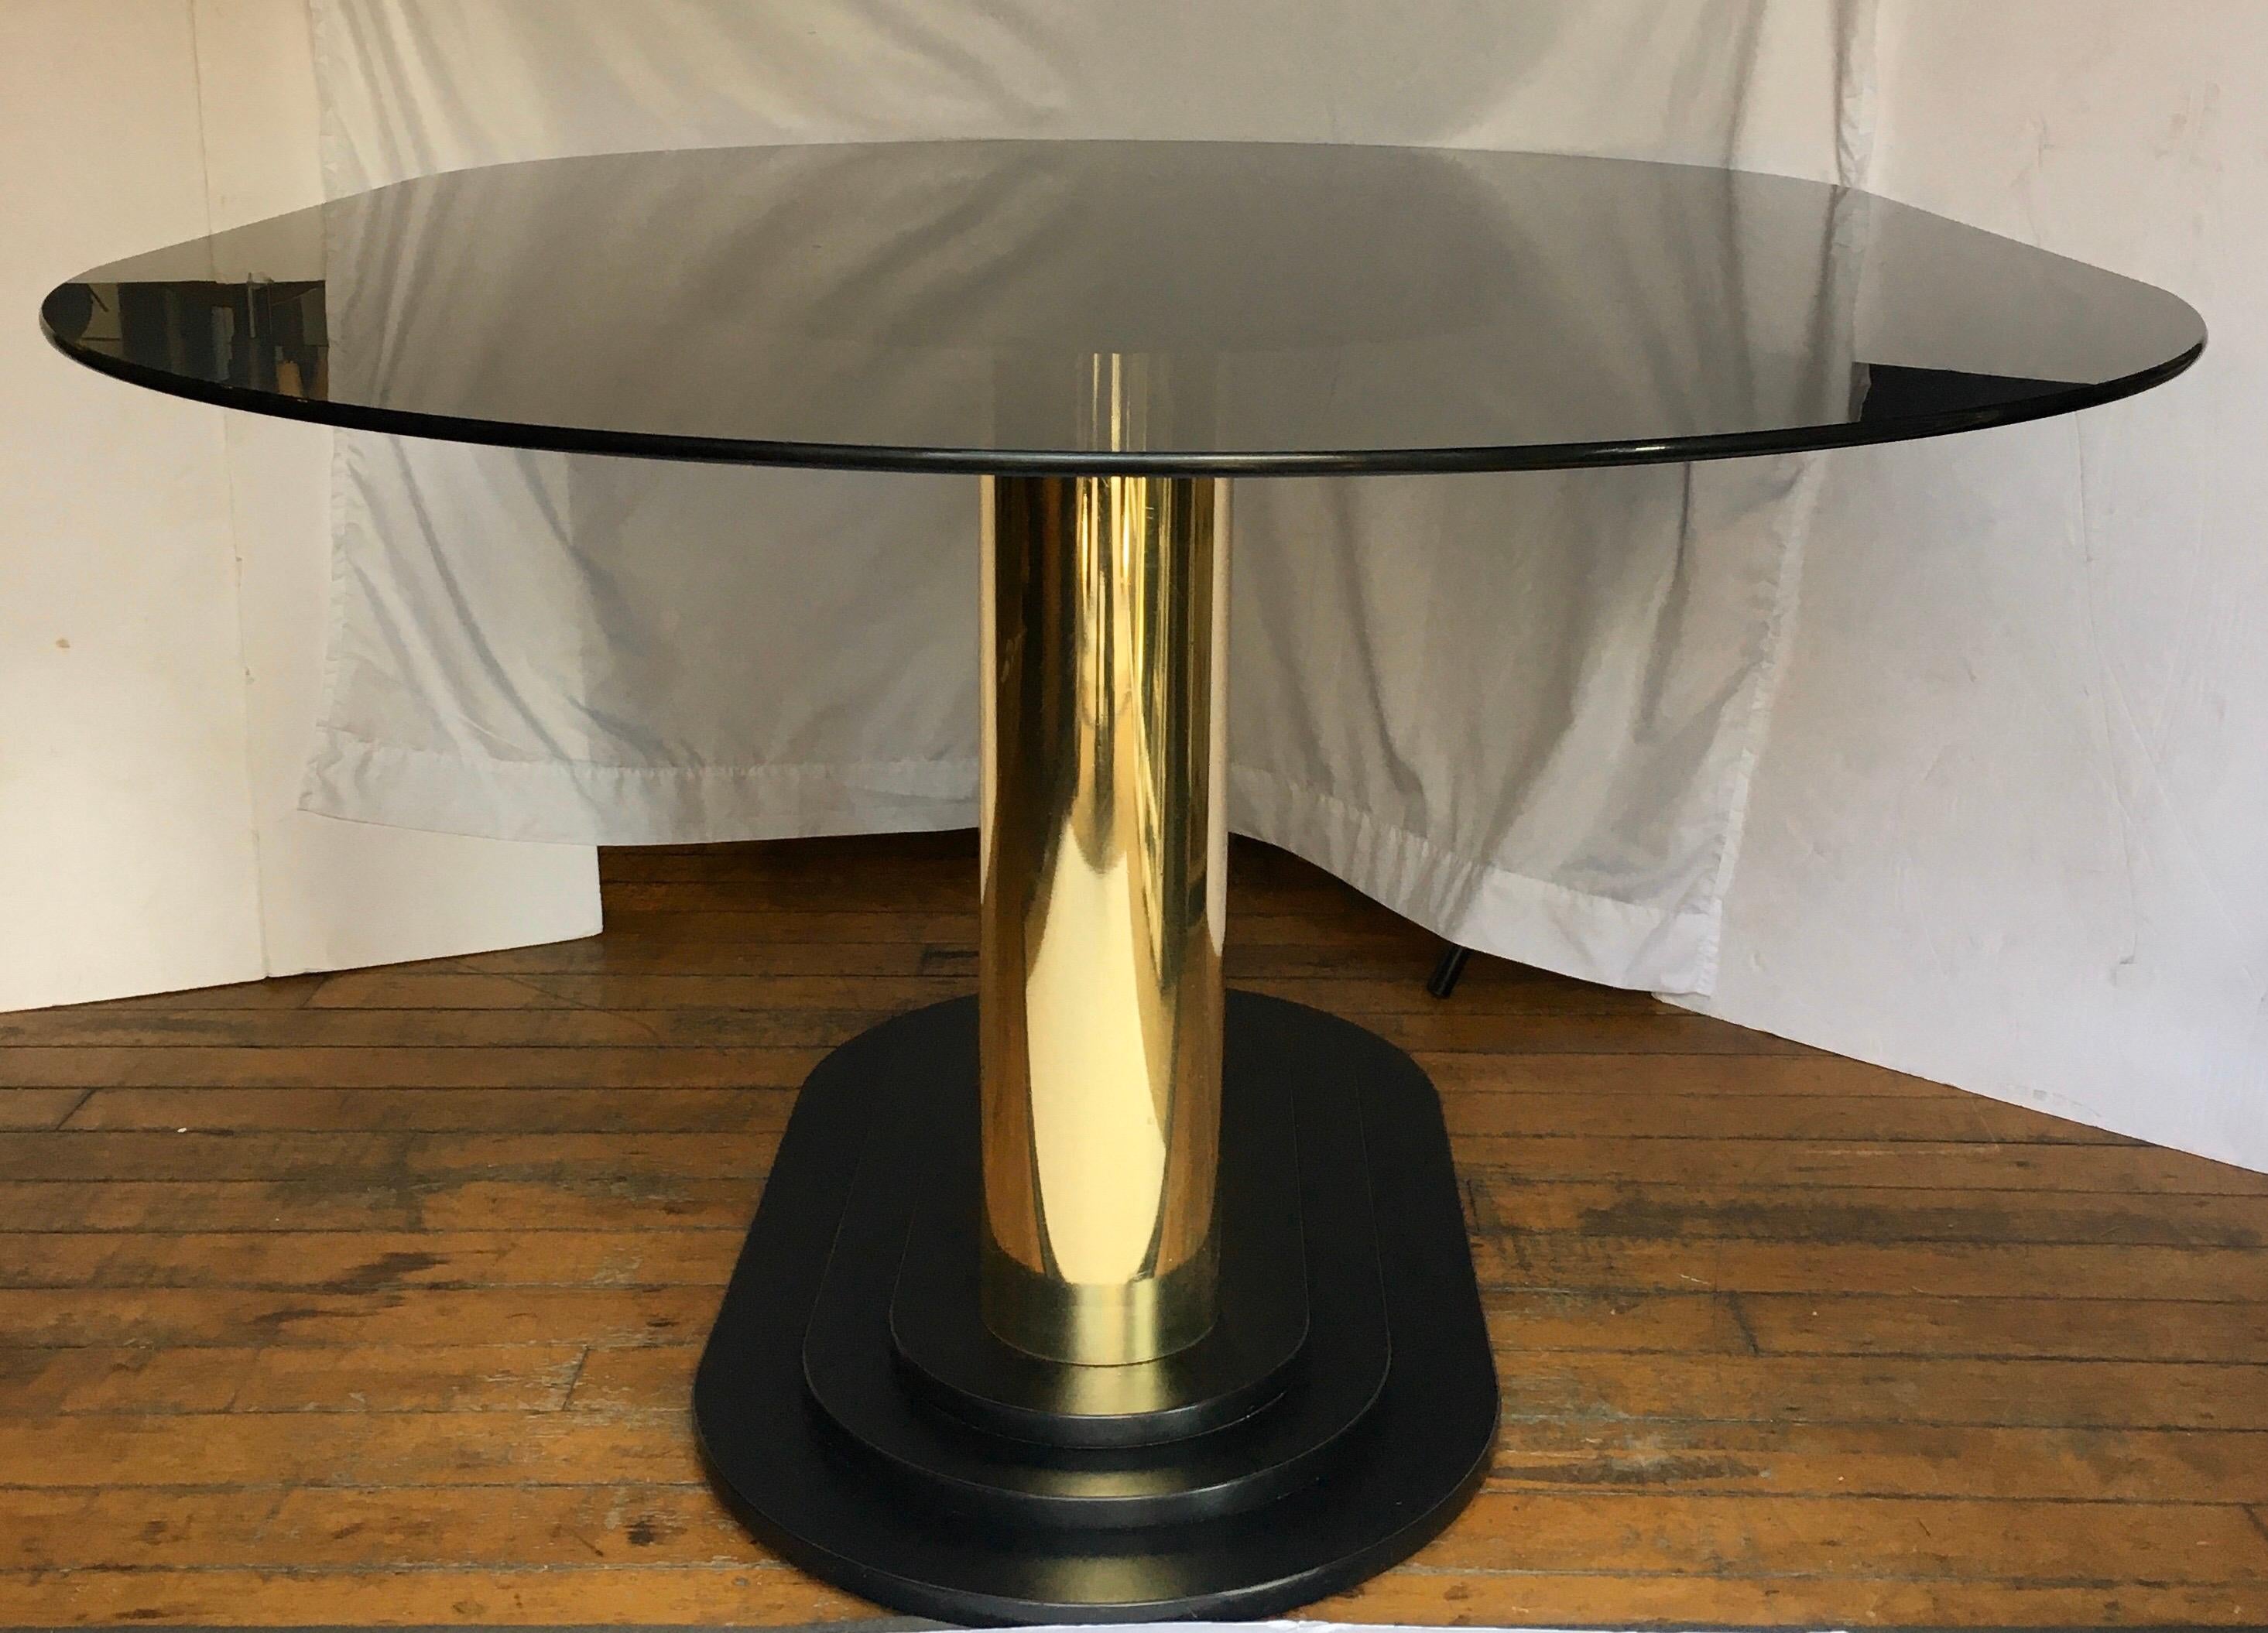 Art Deco style oval dining table featuring a removable smoked glass oval top and a reflective gold double column pedestal base. This modern sculptural piece would also make a stylish center table. Coordinating brass dining chairs also available for